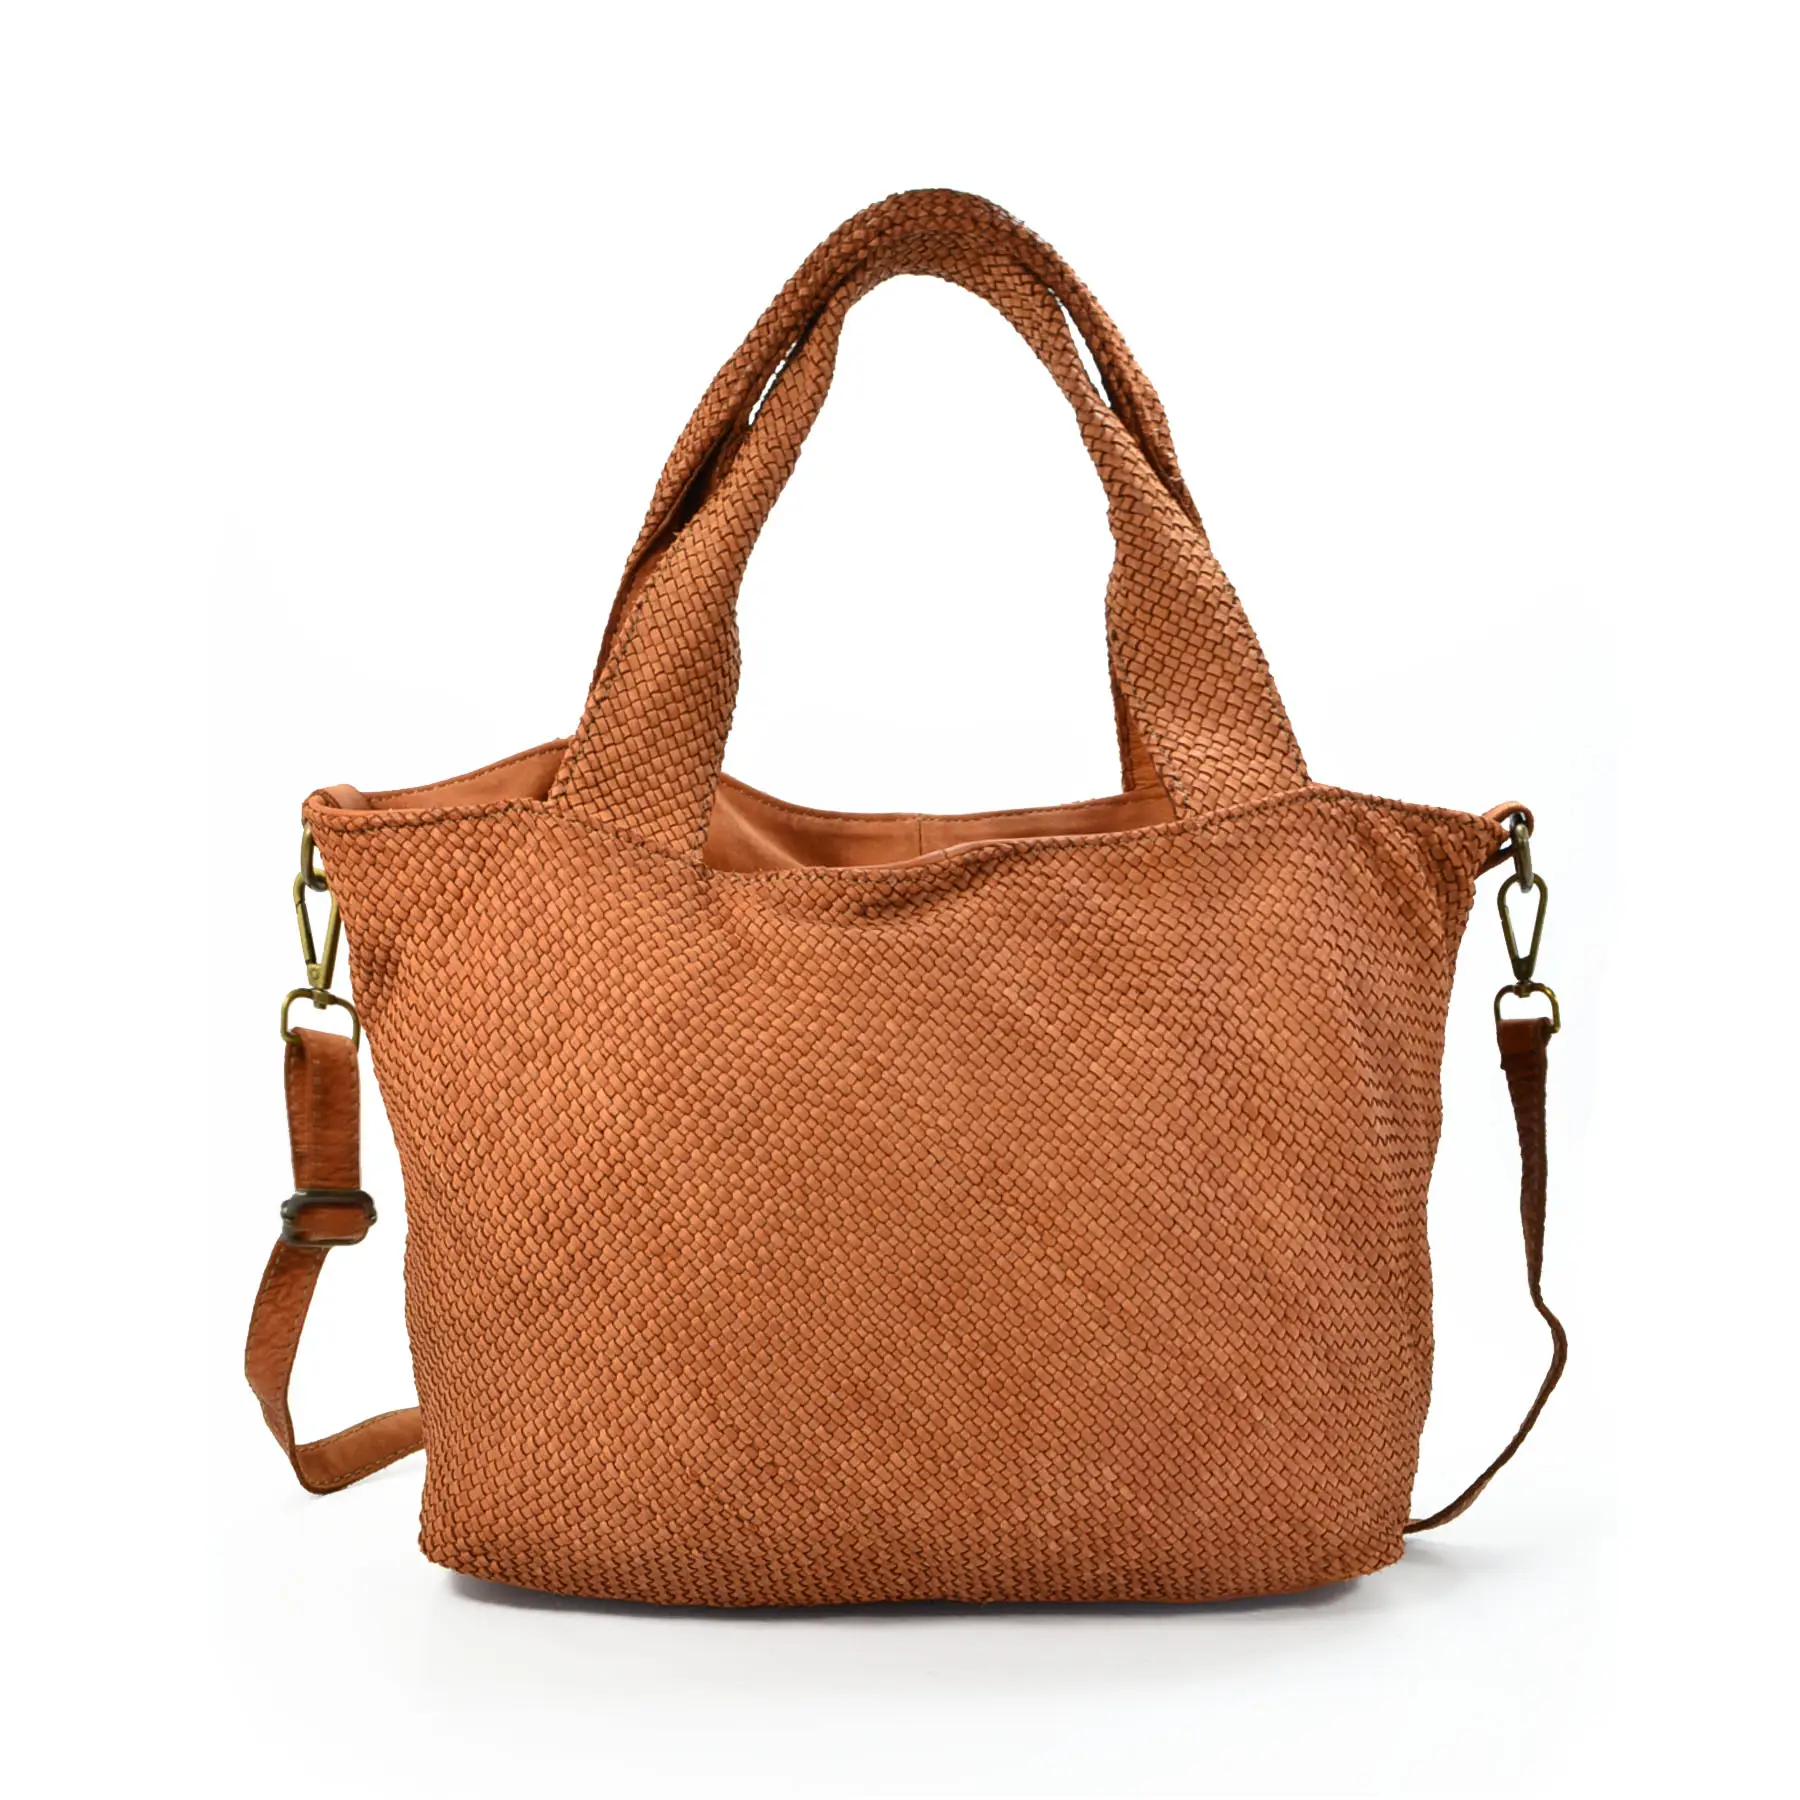 Best Quality Made in Italy Genuine Leather Shopper Bag H077 Suitable for all Season for Work Everyday Outing Fashion